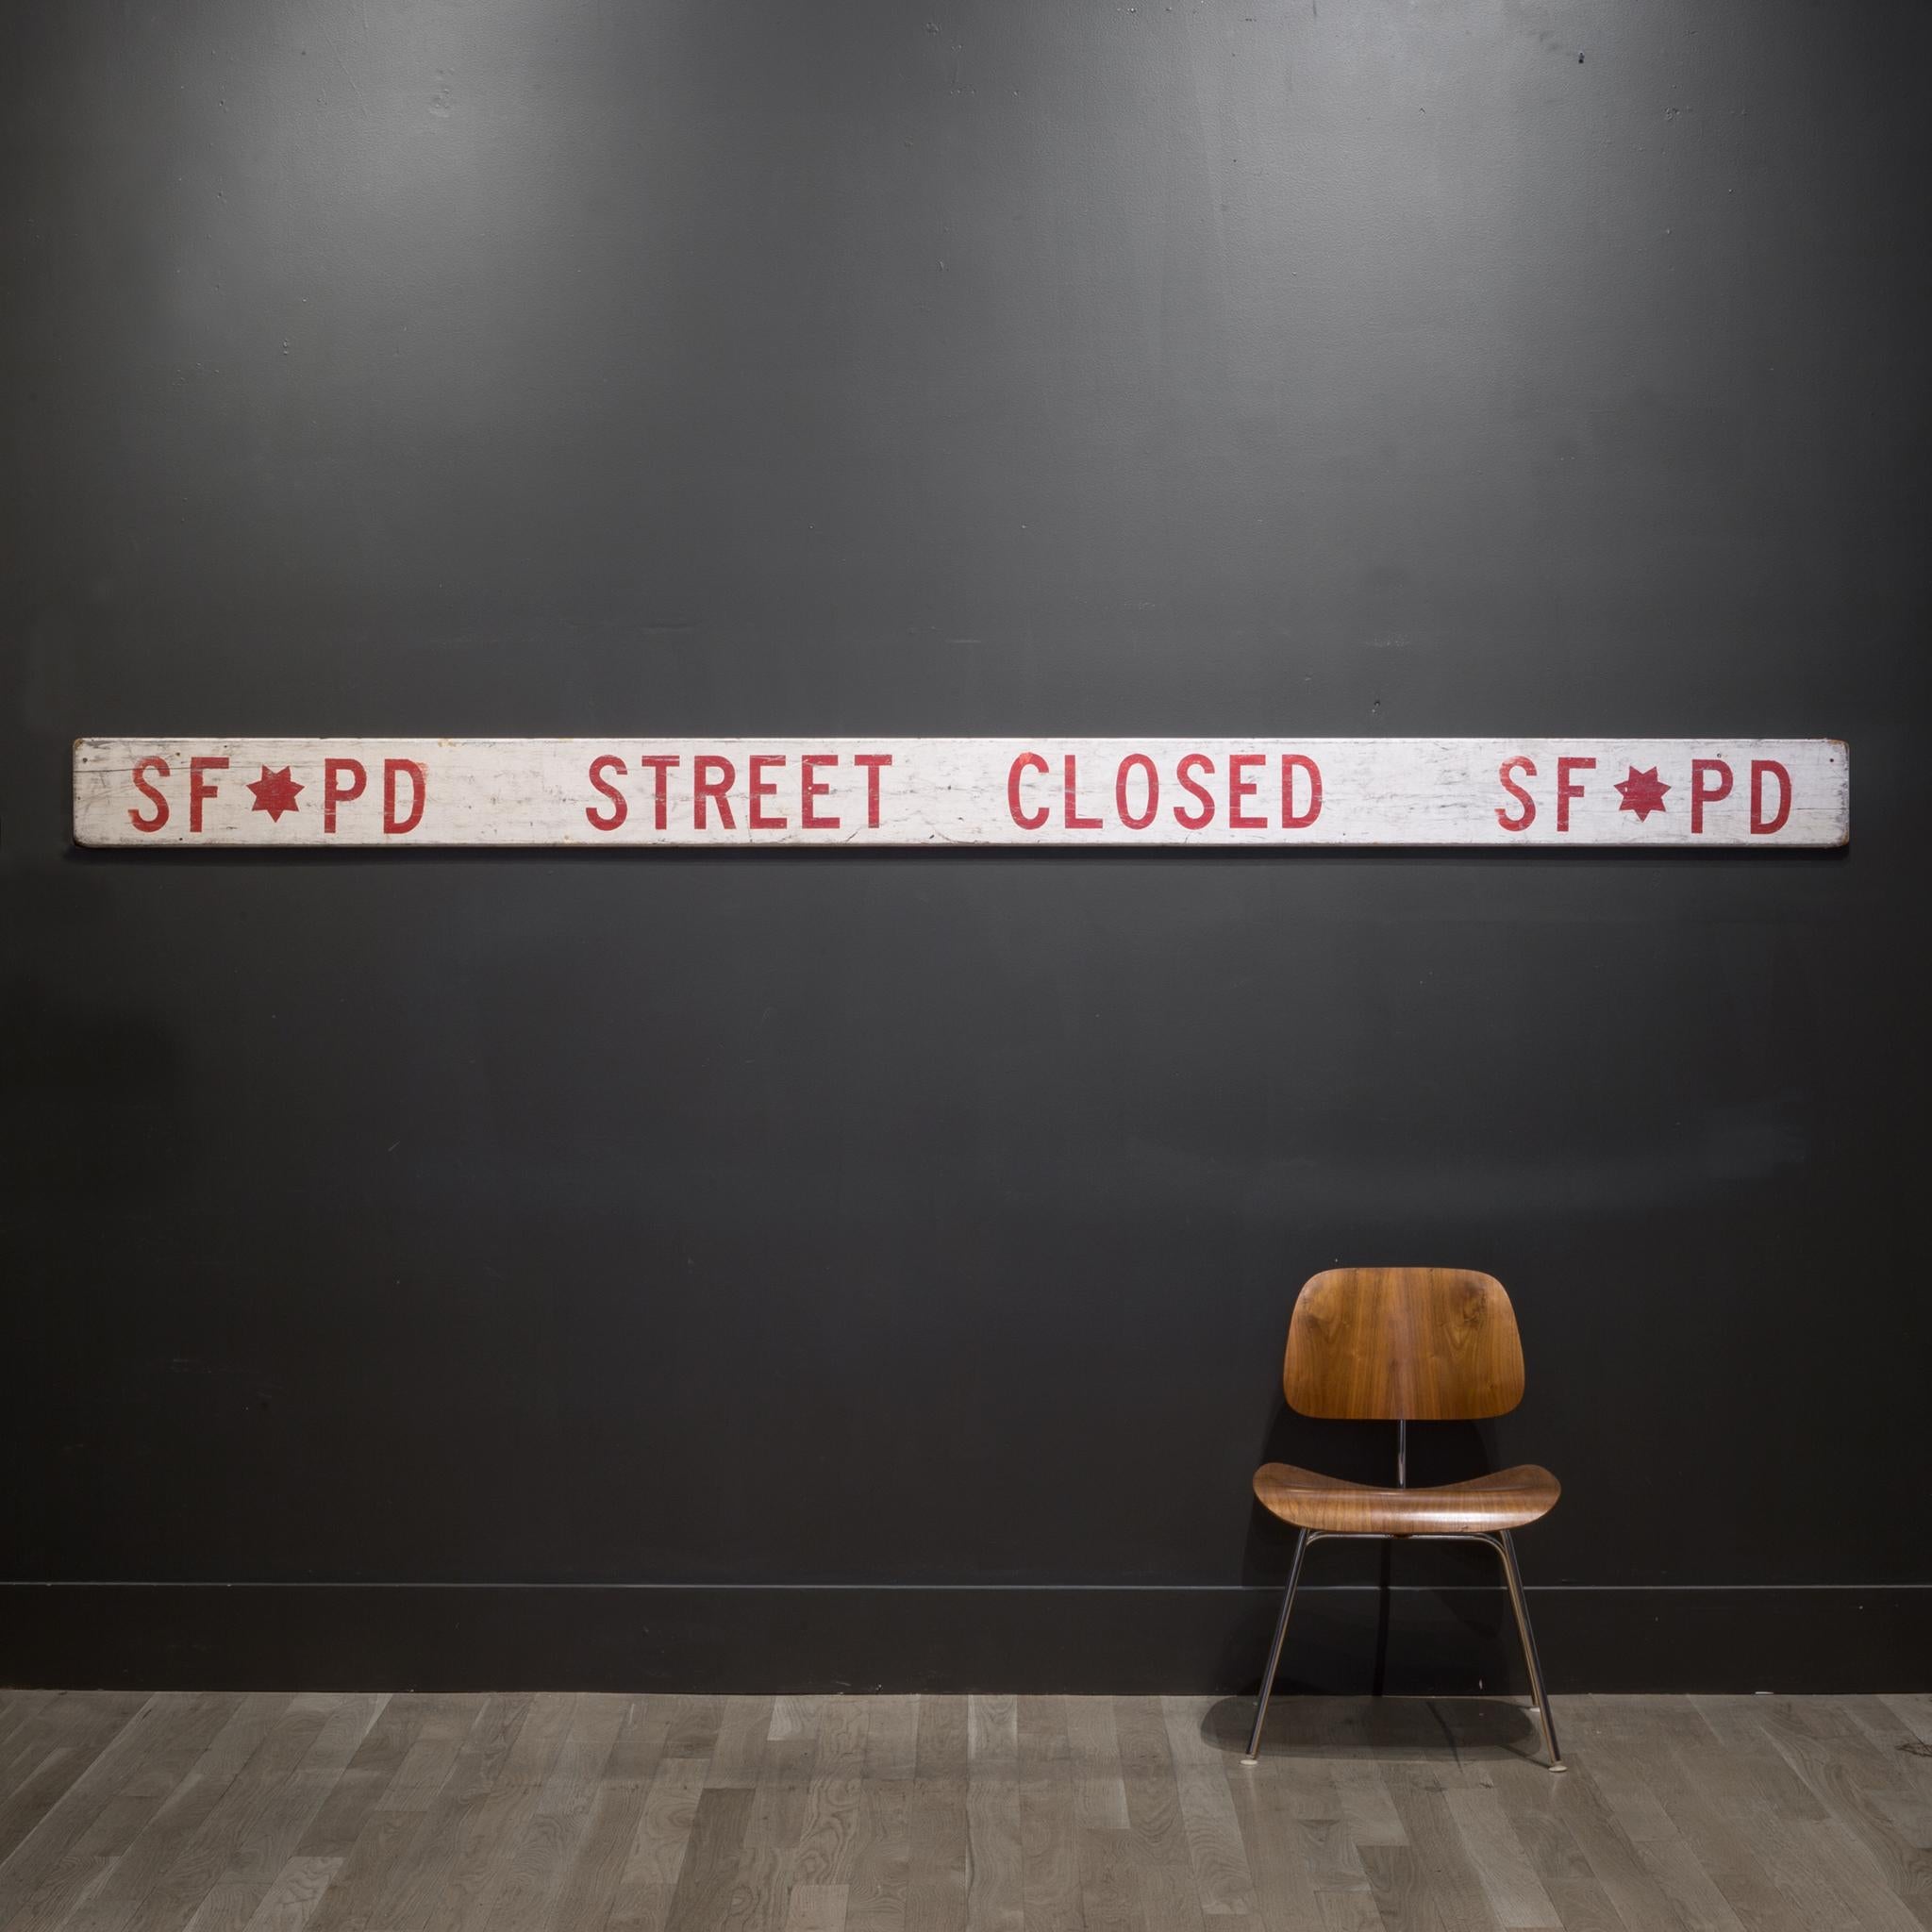 About

This is an original large, hand painted wooden San Francisco Police Department street closed sign. The sign is double sided and shows some wear to the paint consistent with age and use.
Contact us for more shipping options: S16 Home San